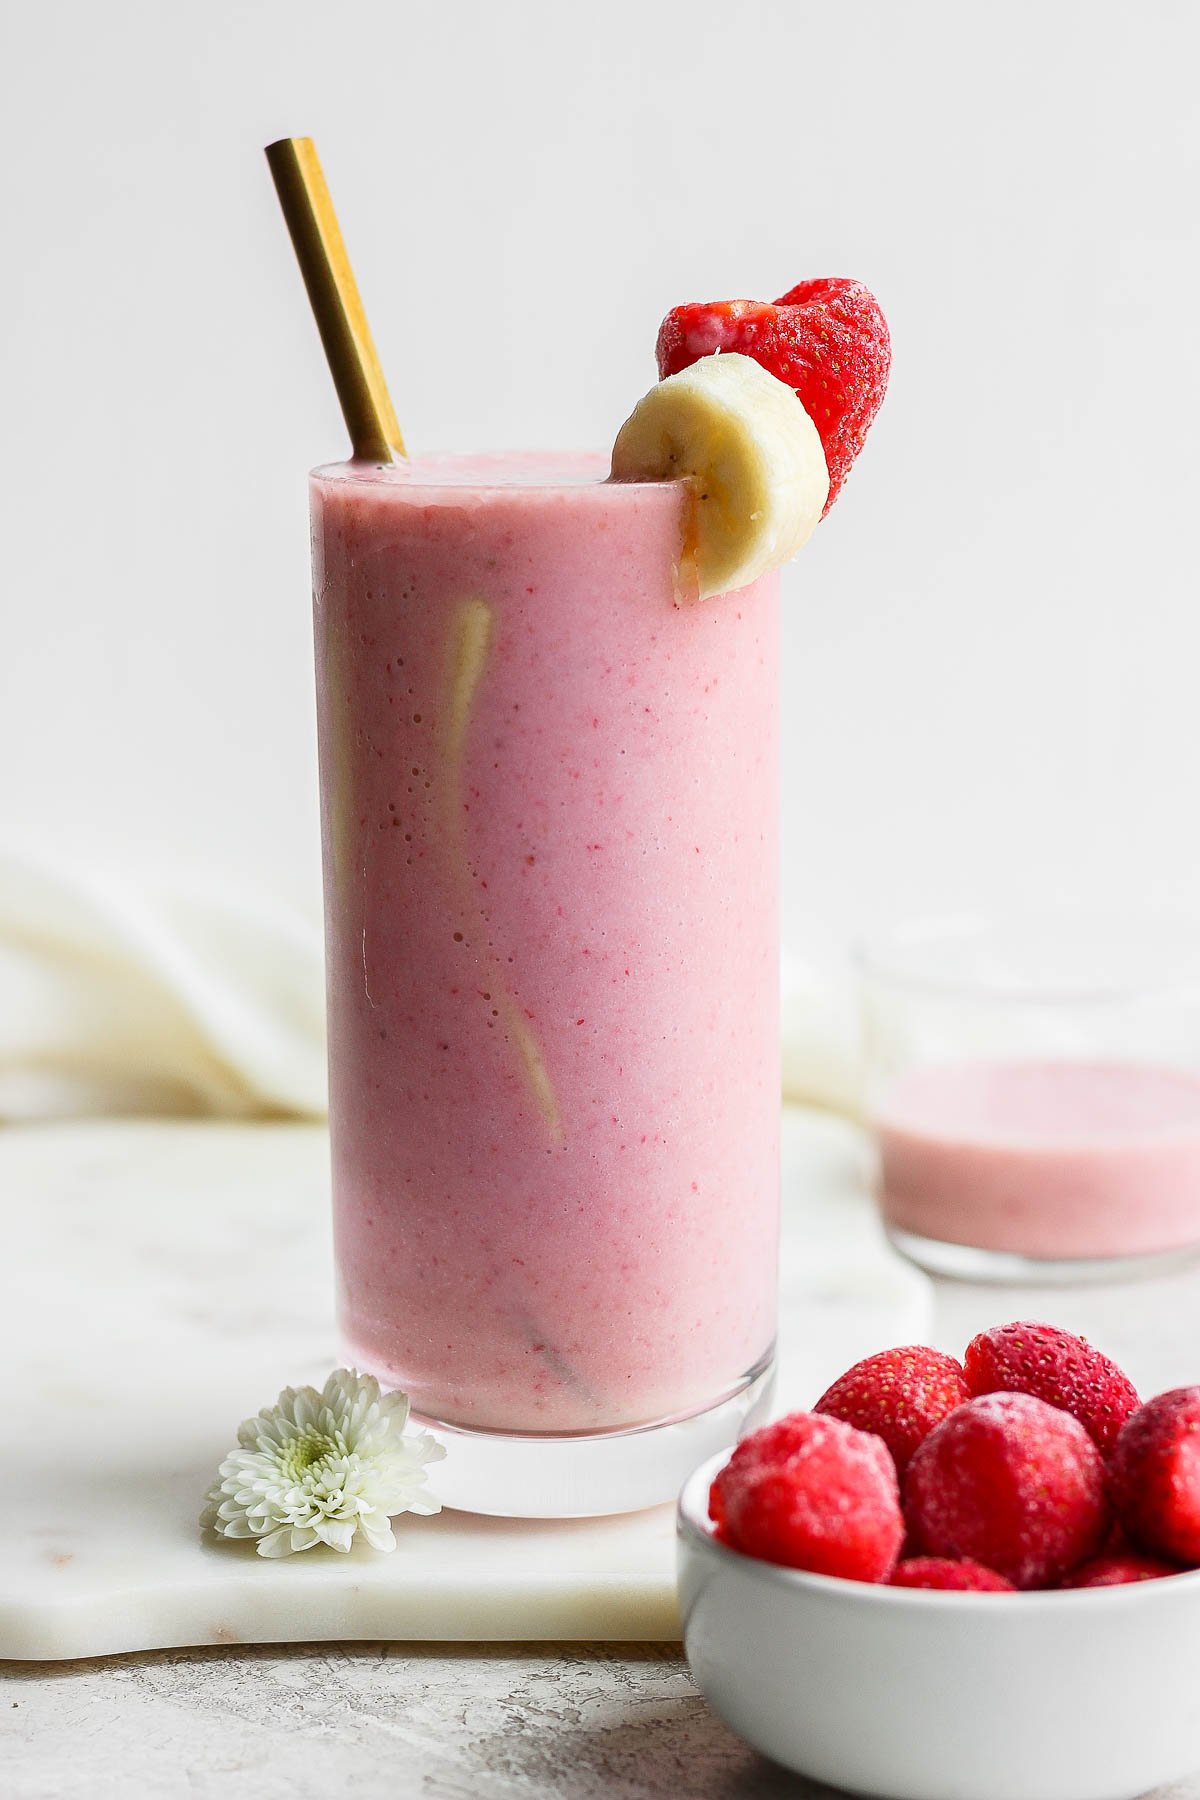 Strawberry Banana Smoothie - The Wooden Skillet